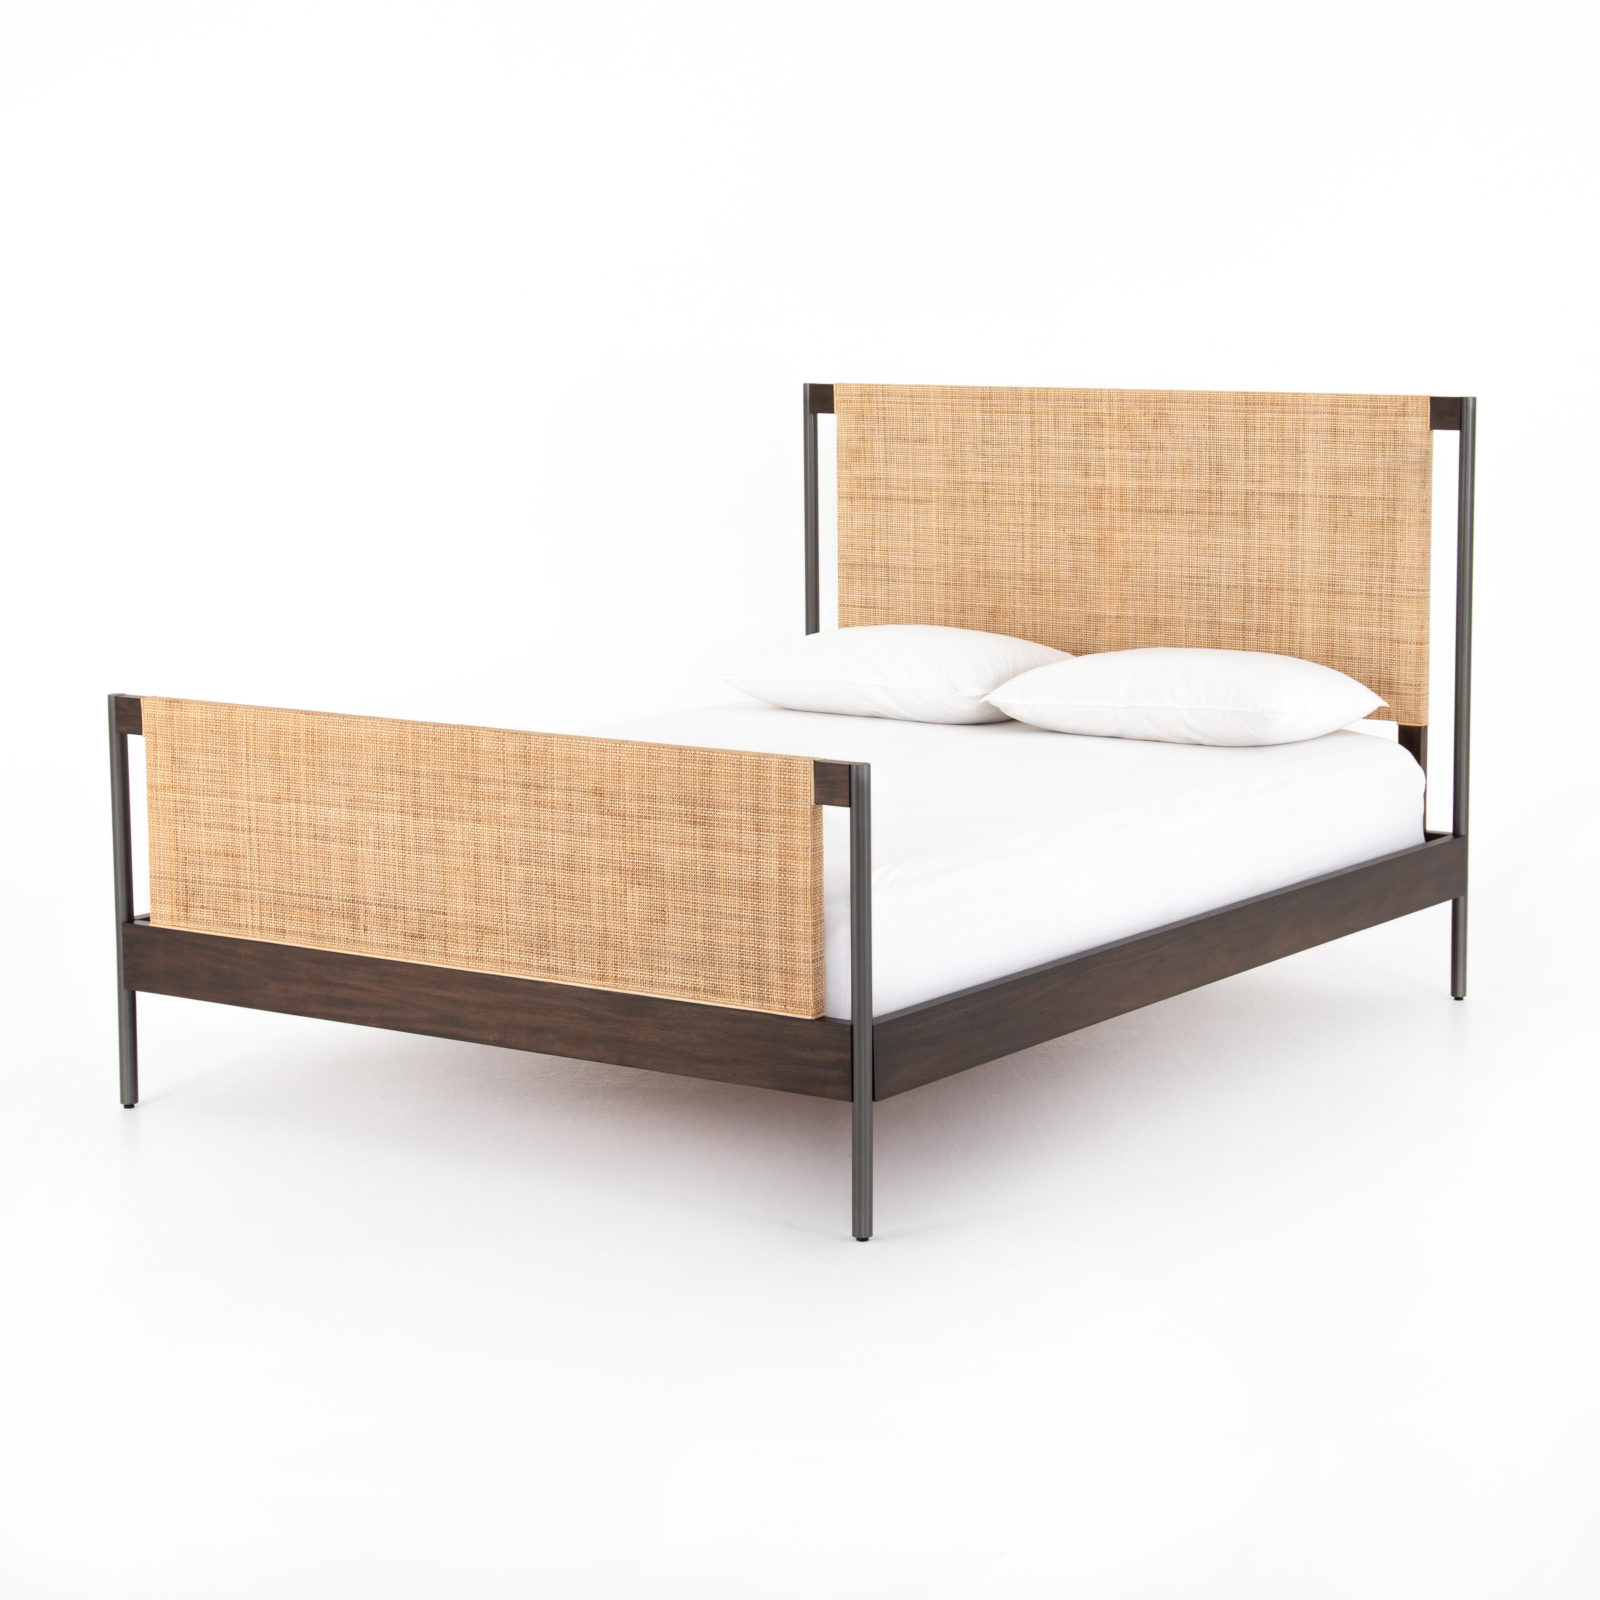 natural cane and wood bed